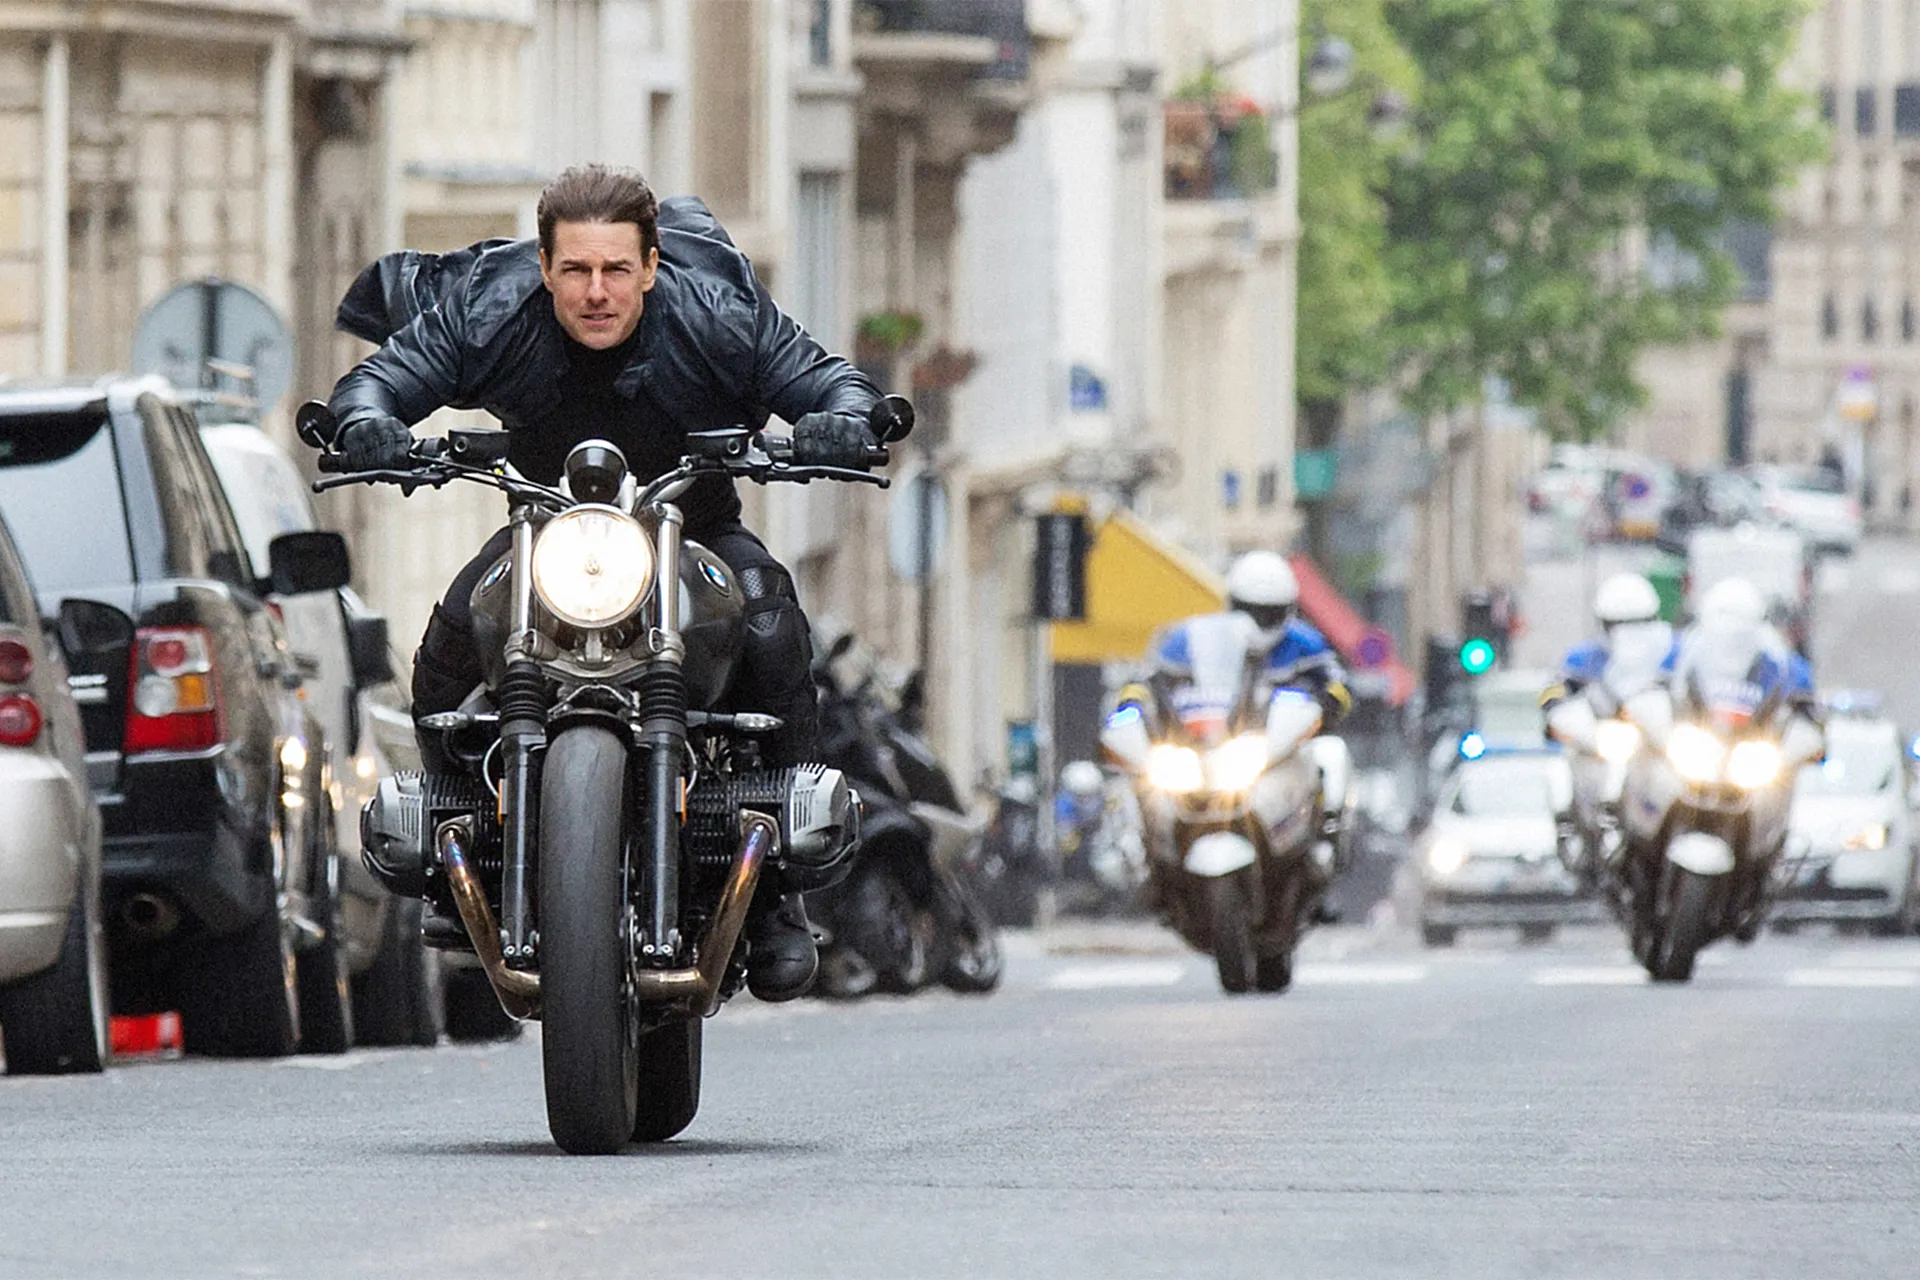 Why Did They Kill Off a Beloved Character in Mission: Impossible? Fans and Filmmakers Weigh In